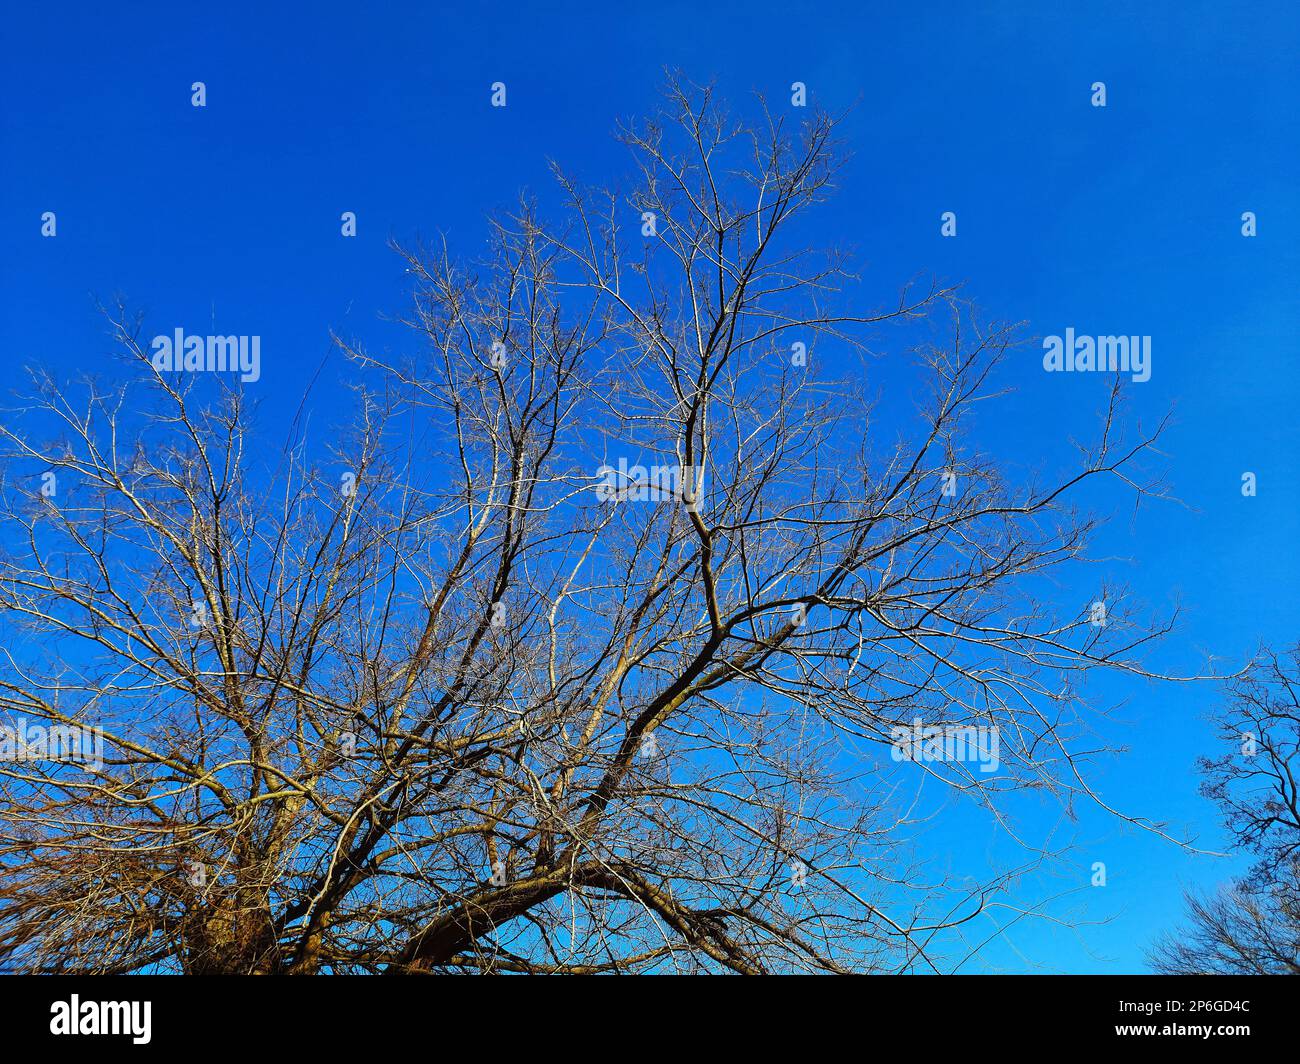 Iron tree in early spring against the blue sky. An old Celtis L tree with a large crown and a large trunk. Stock Photo